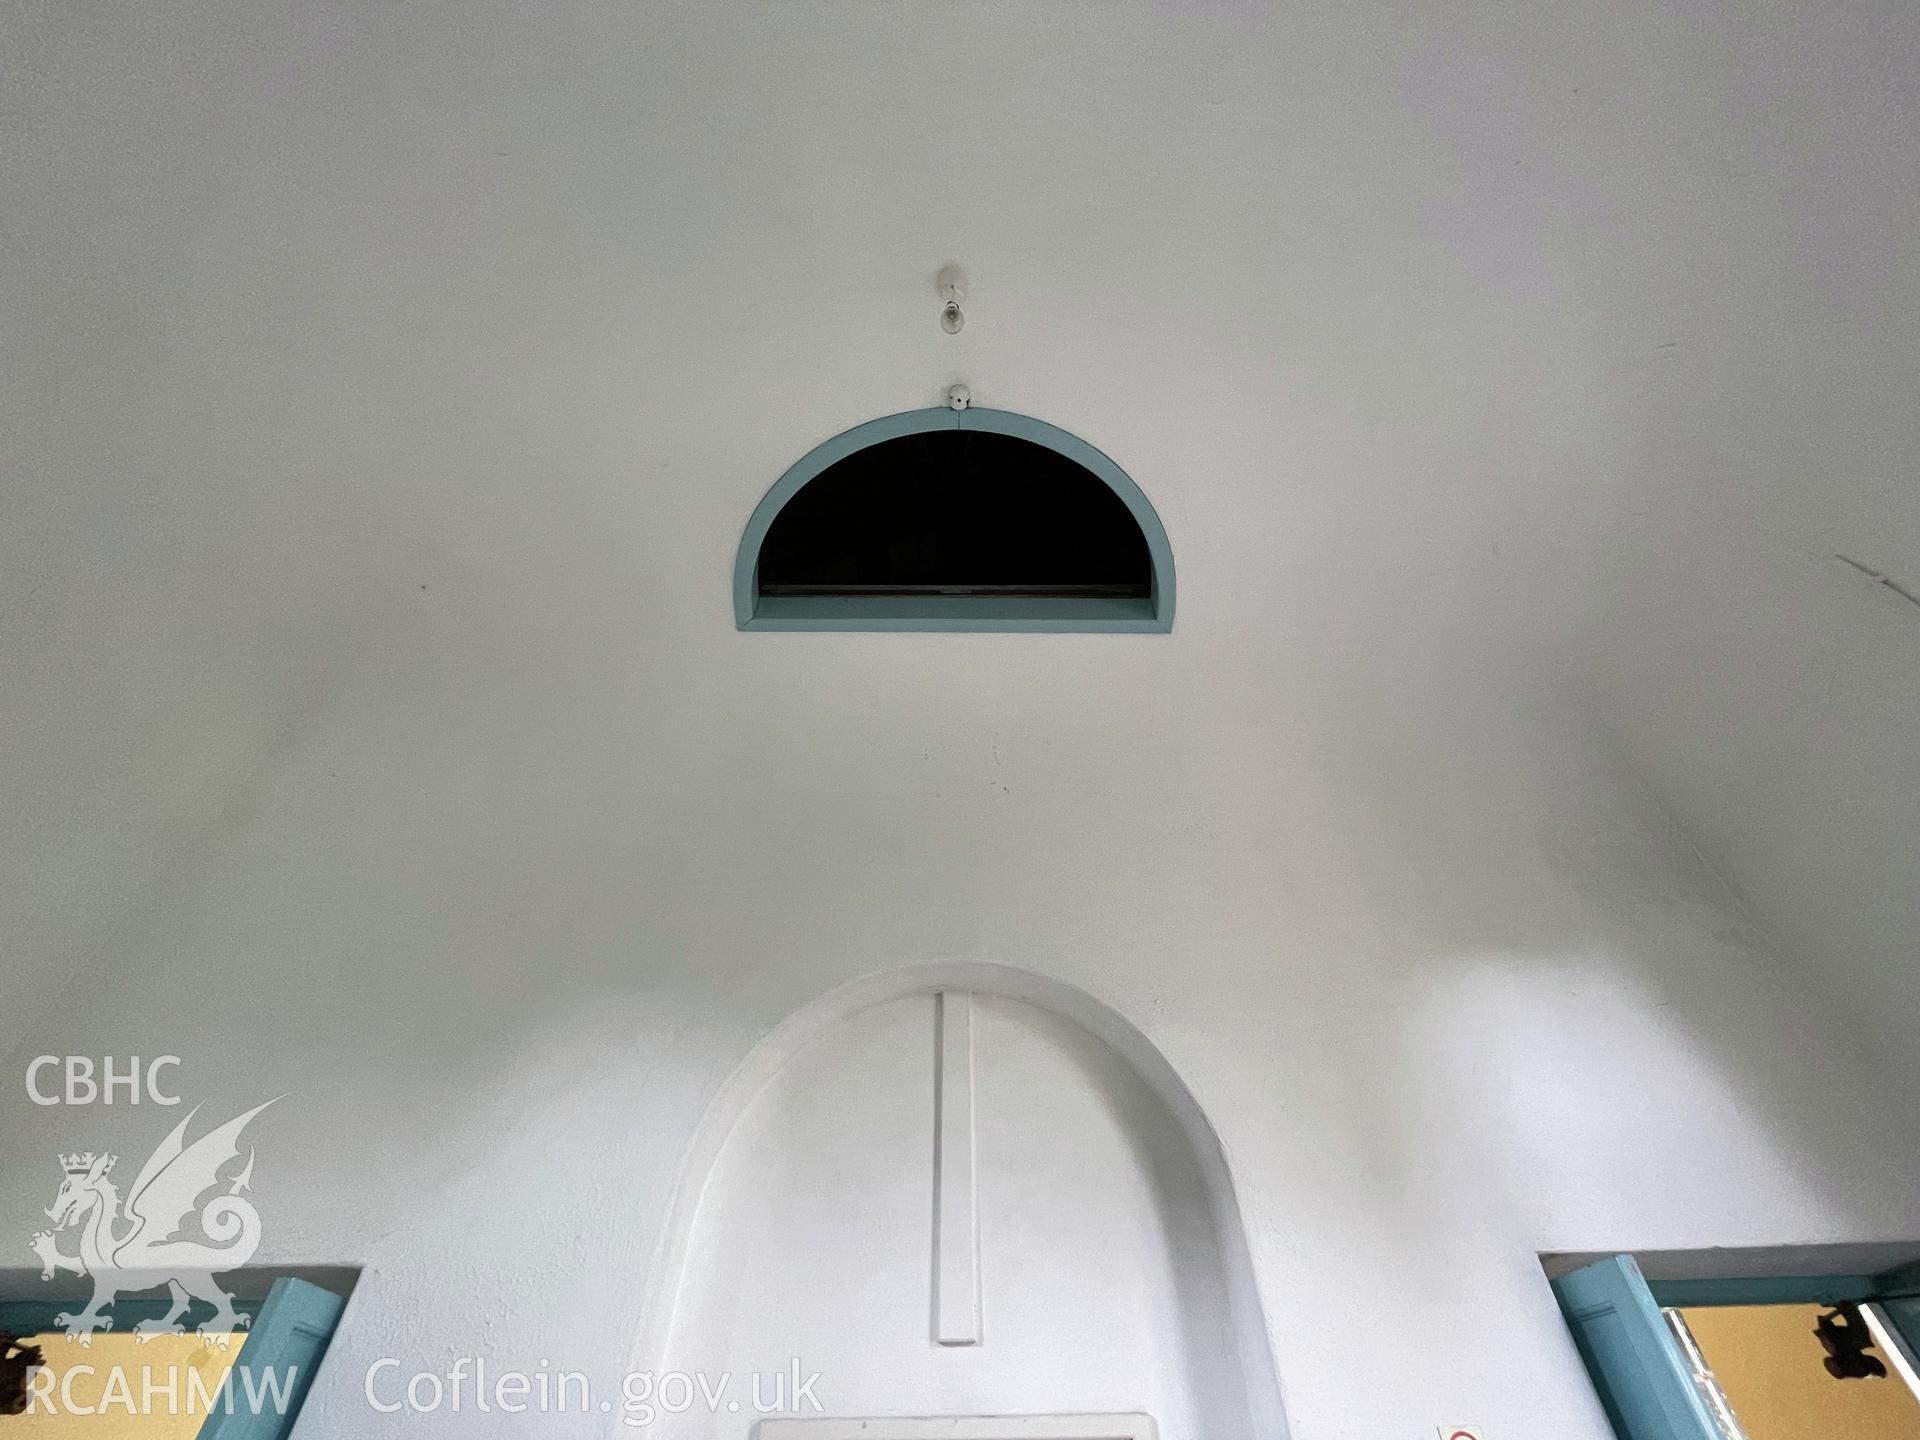 Colour photograph showing vestibule ceiling (facing north) - part of a photographic record relating to Moriah Chapel, Llanystumdwy, produced as a condition of planning consent (Planning Reference C21/0420/41/LL; Gwynedd Council).